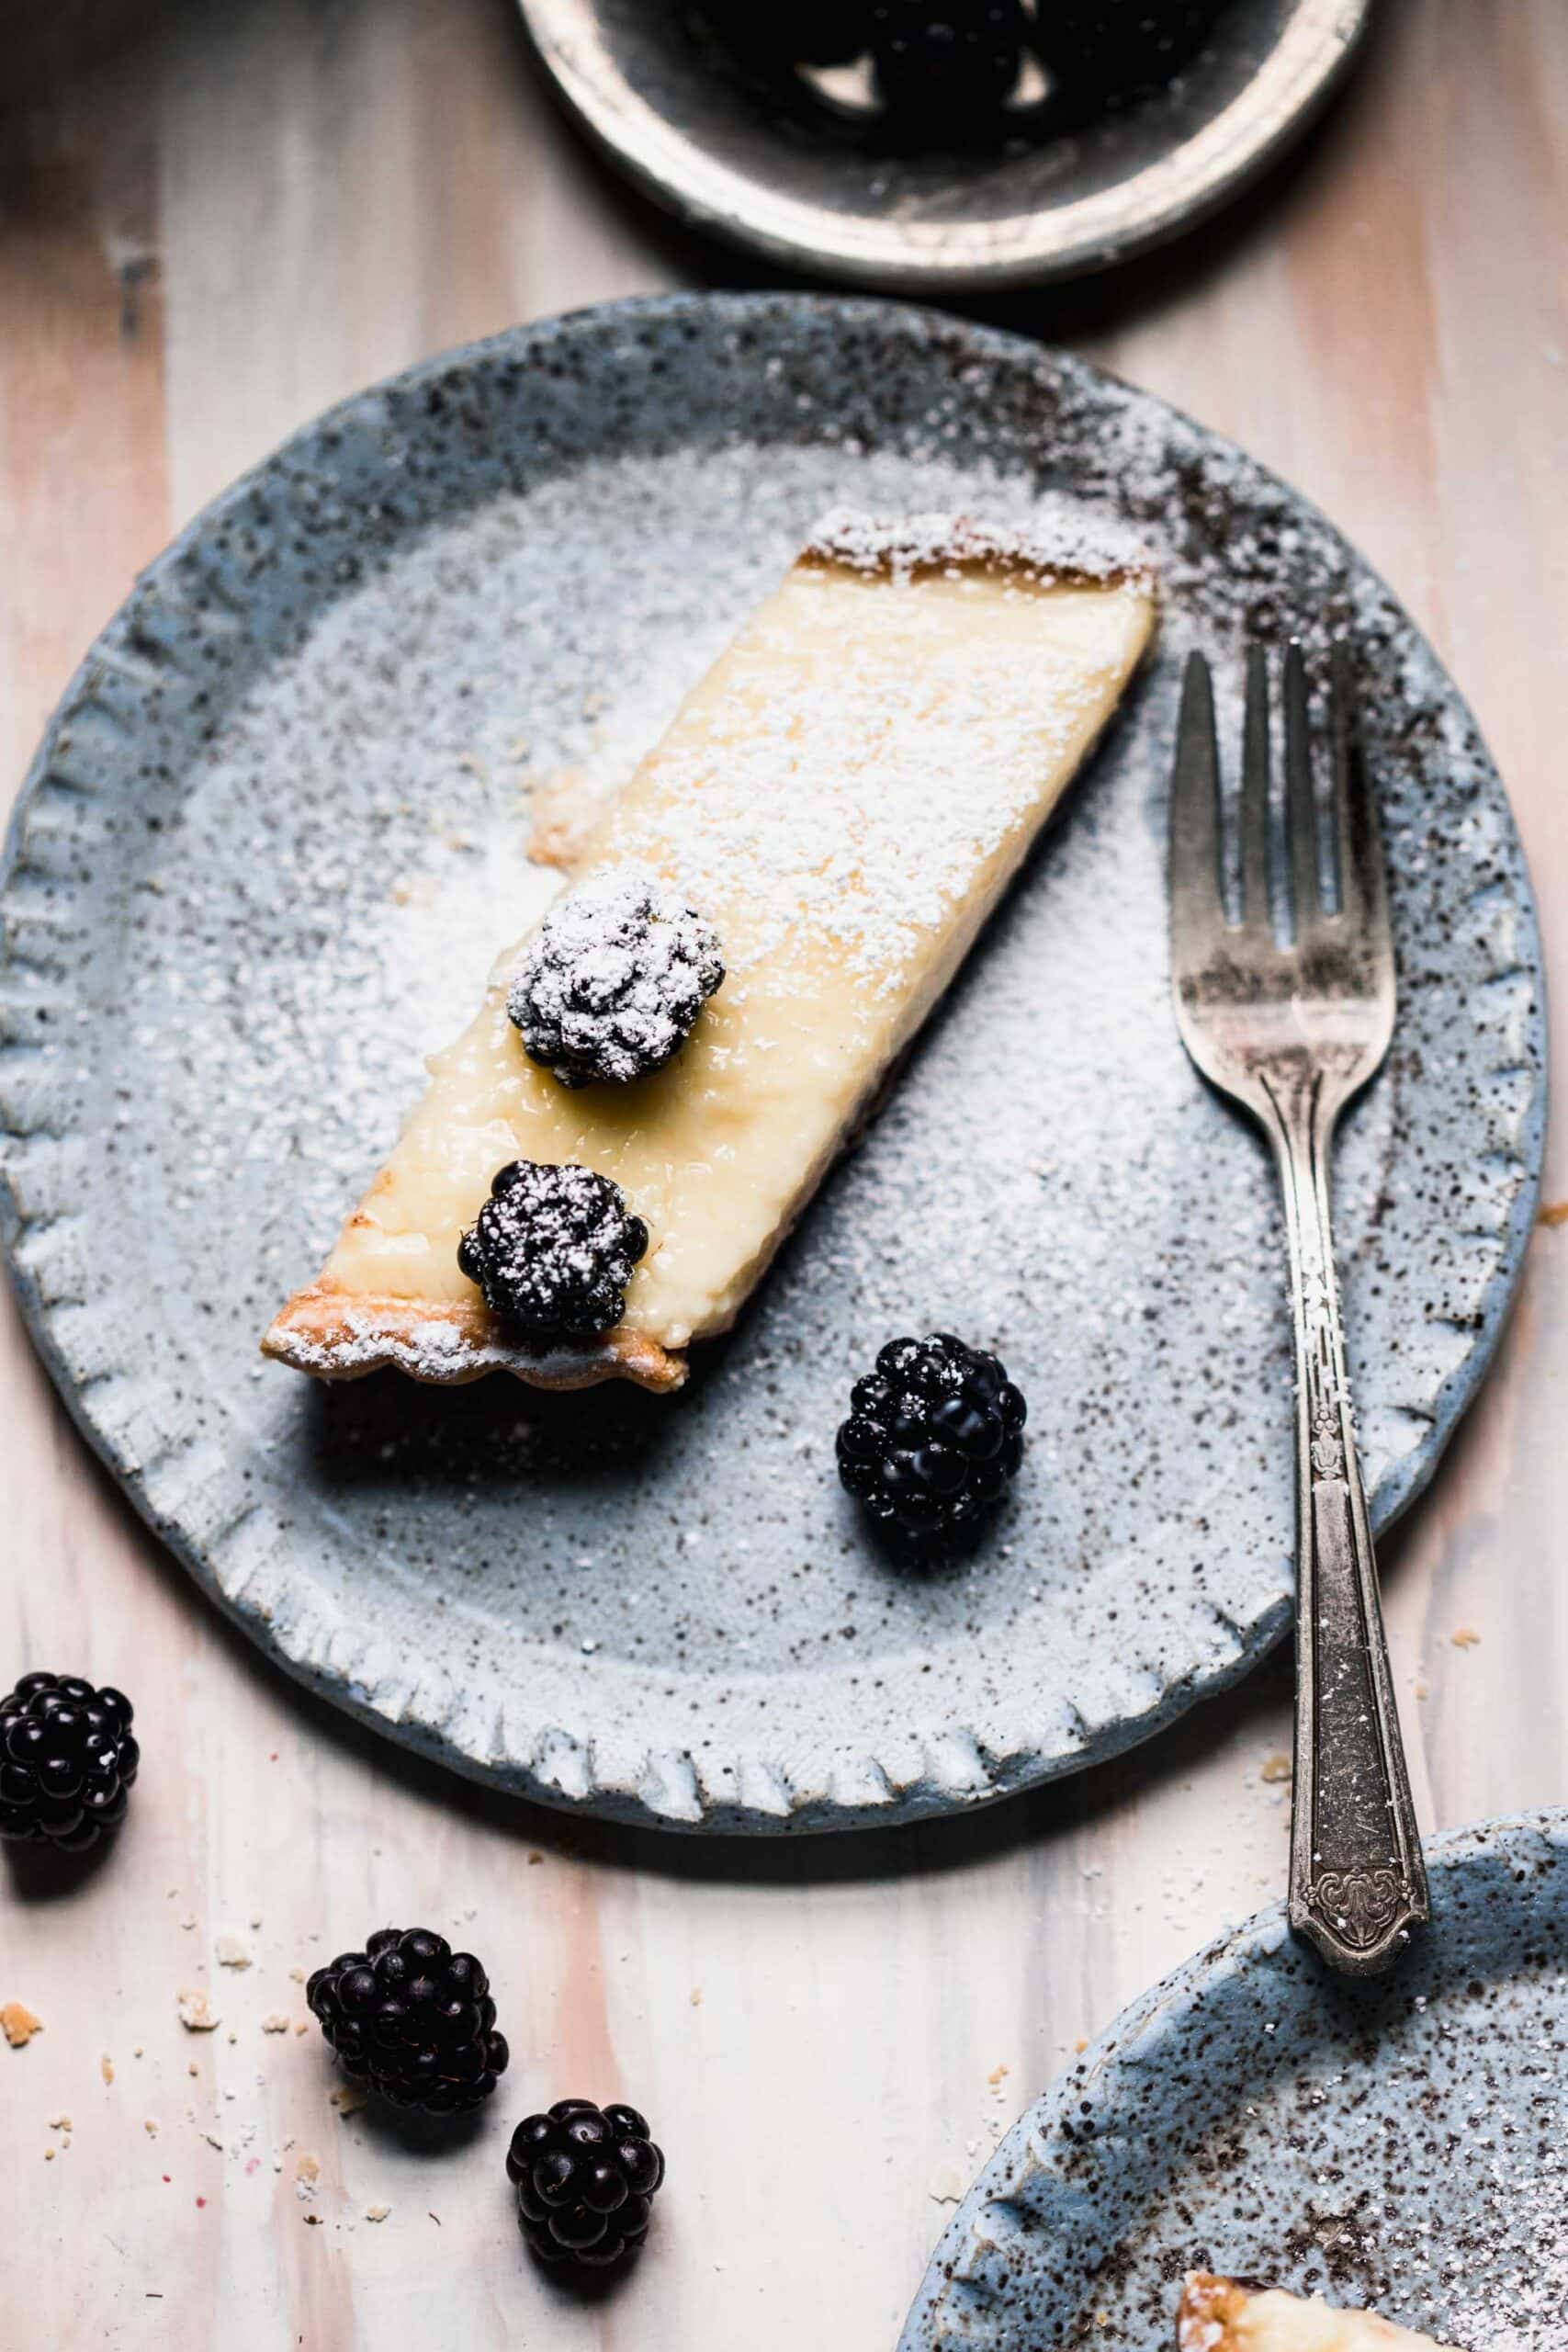 Slice of custard tart topped with powdered sugar and blackberries on blue speckled plate.